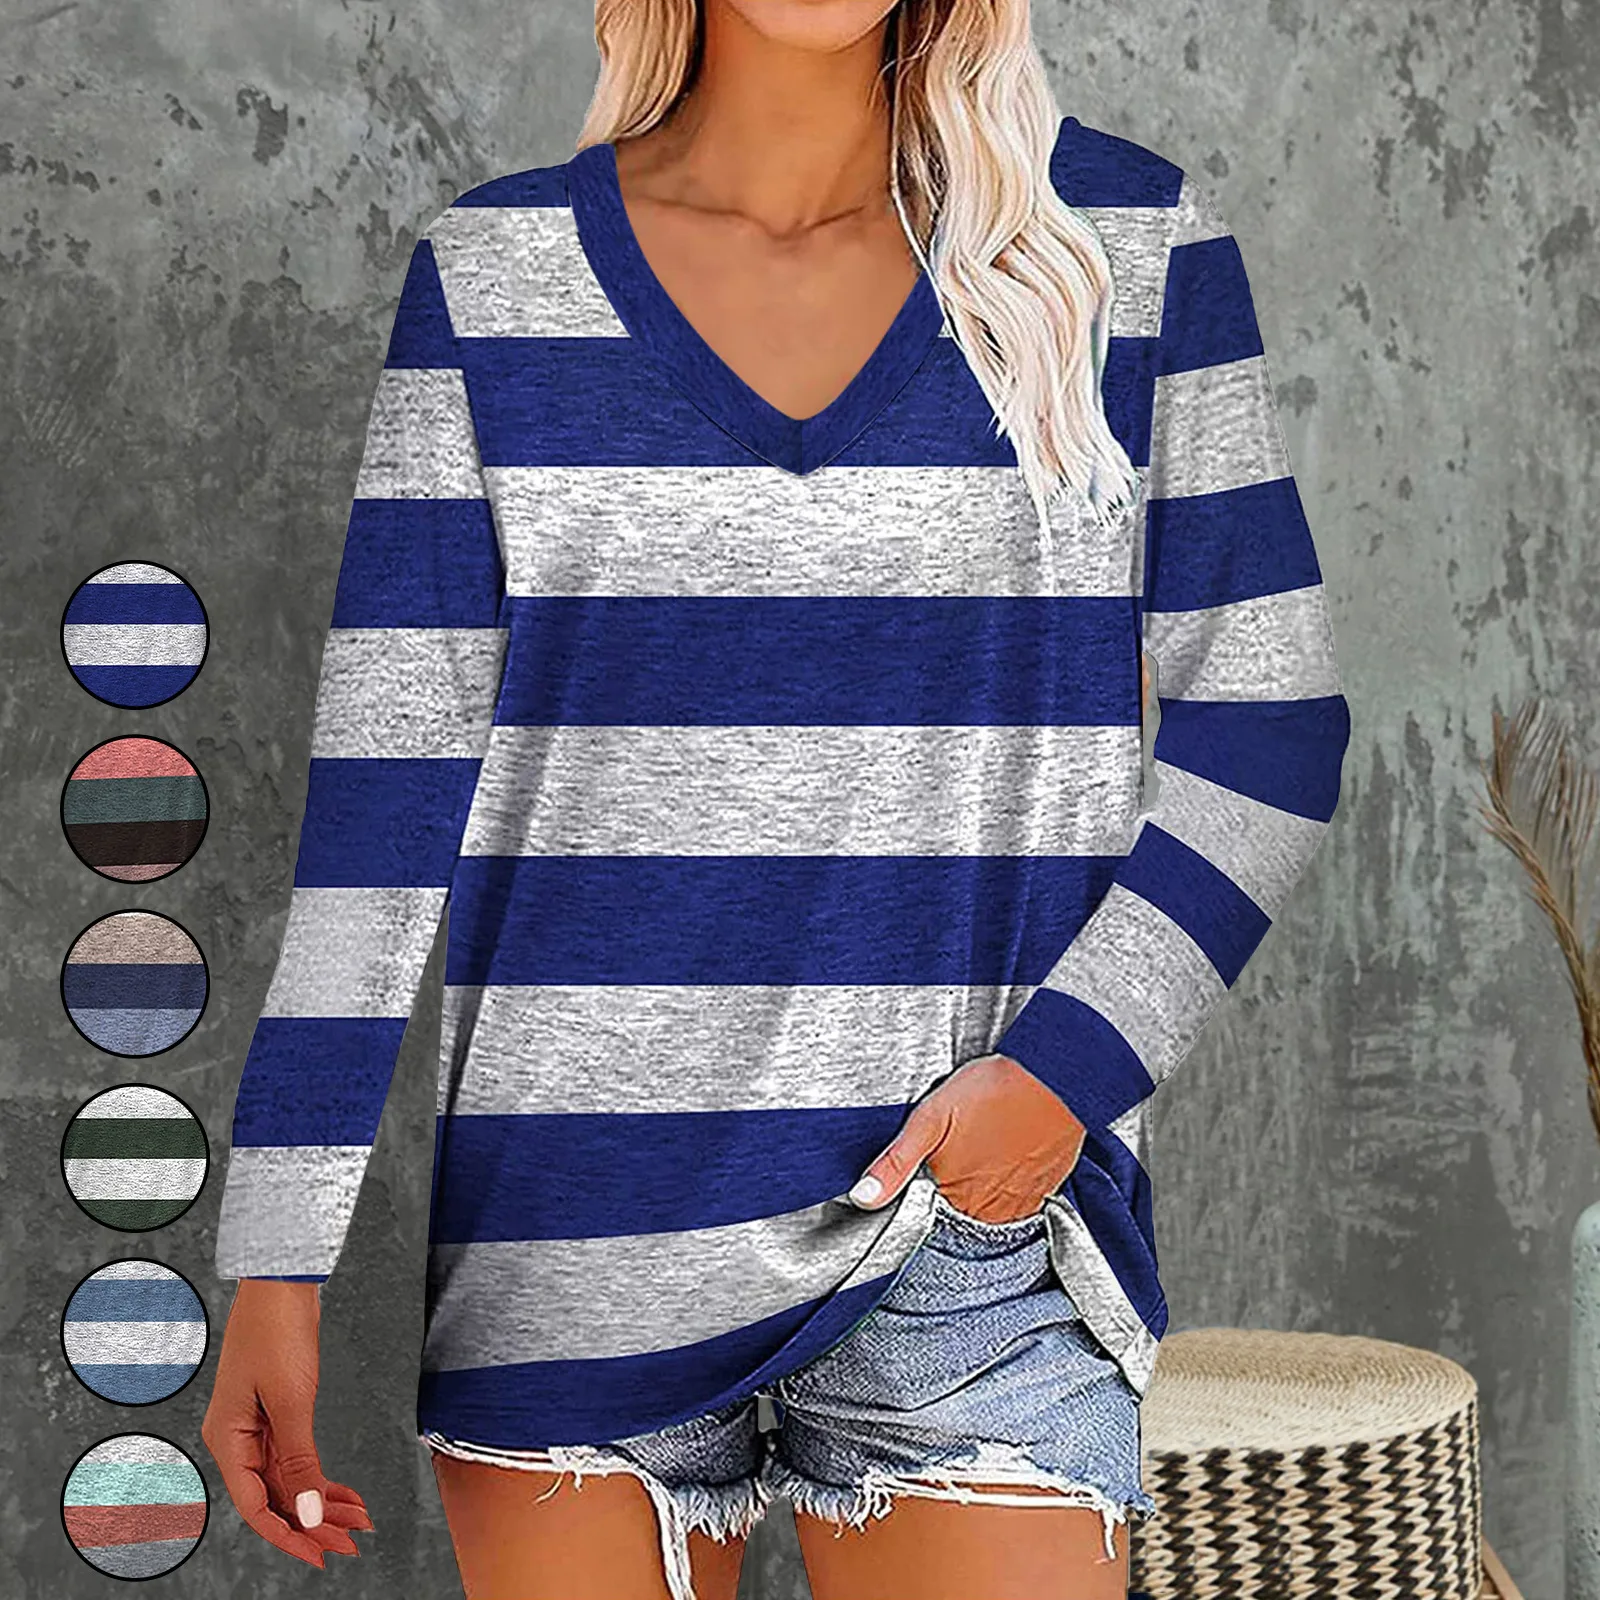 2022 Autumn New Women's Striped Fashion Casual Loose V-neck Long-sleeved Top T-shirt футболка смешная